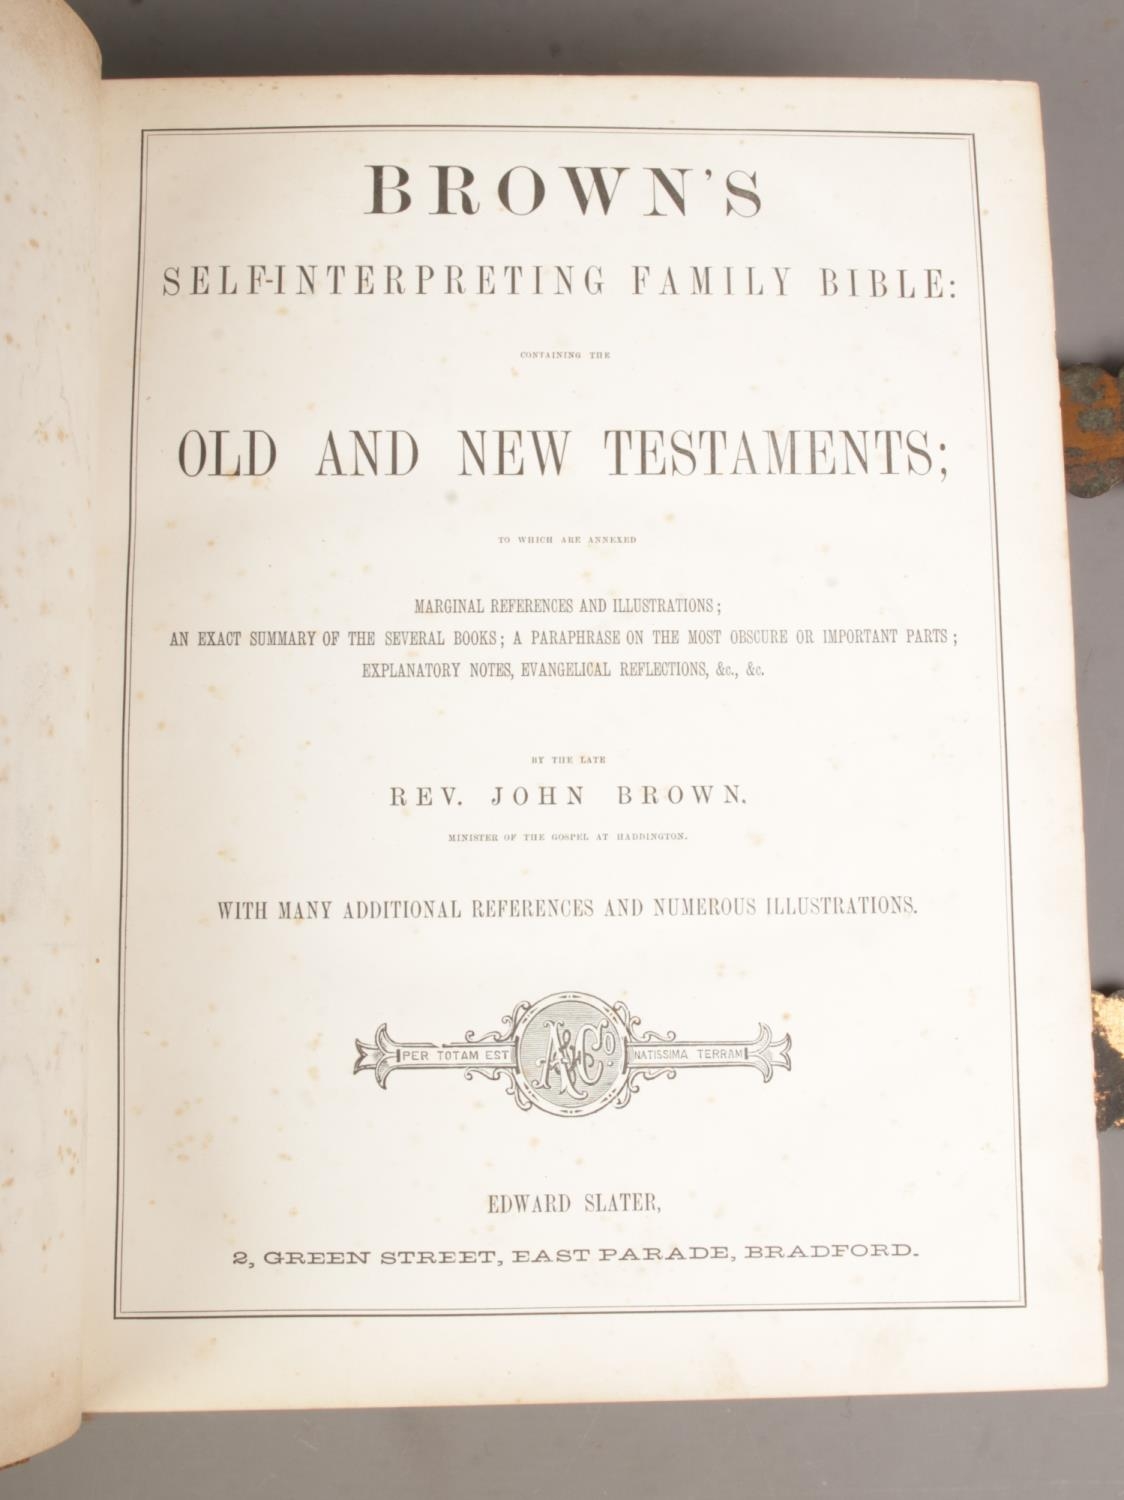 A Brown's leather bound family bible. By Rev. John Brown. Published by Edward Slater, East Parade, - Image 3 of 3